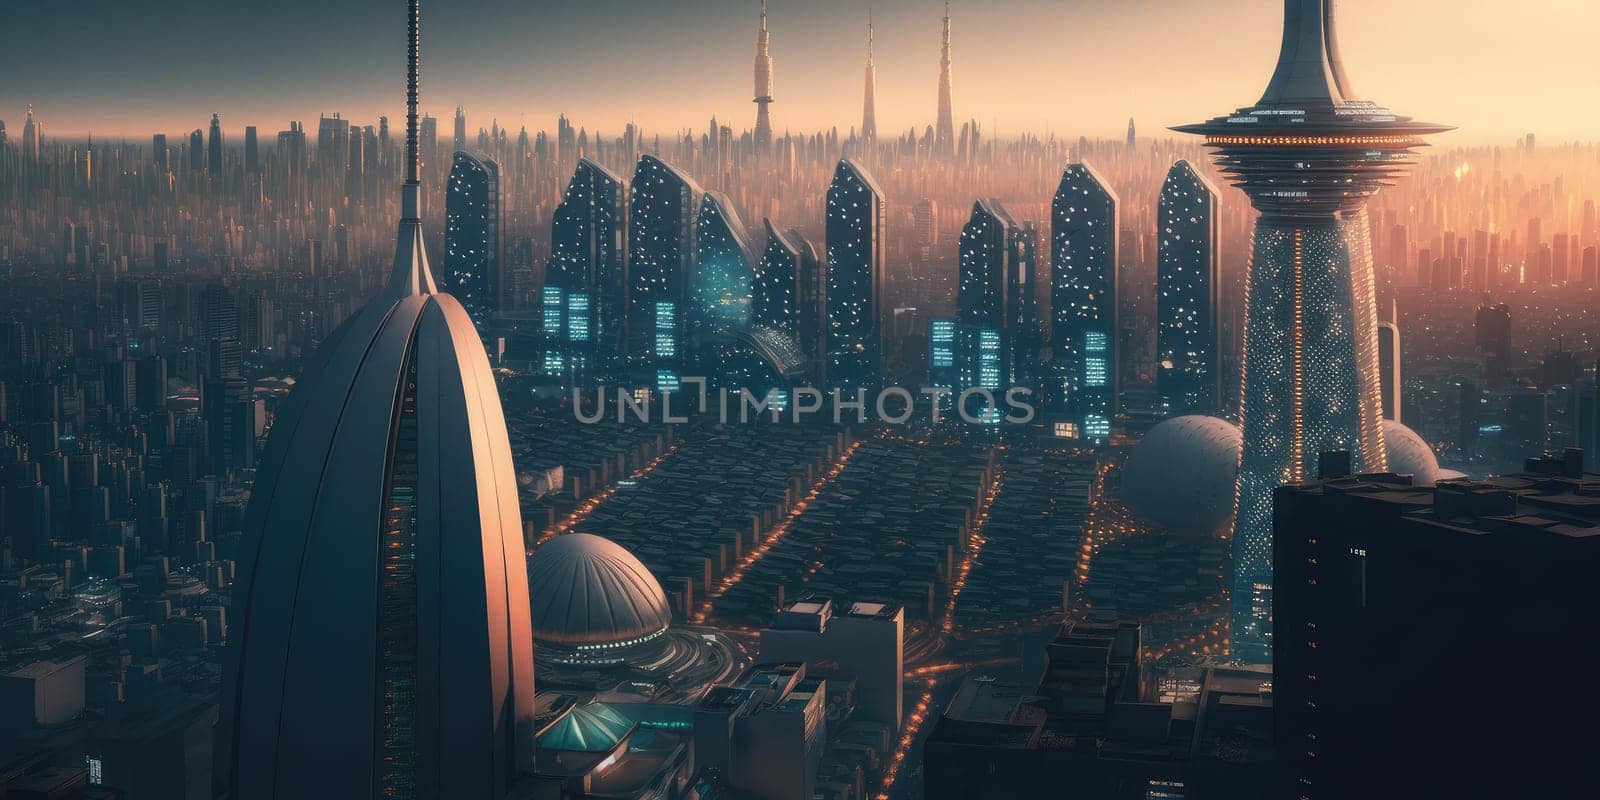 Science fiction fantasy world cityscape skyline with futuristic building architecture by biancoblue